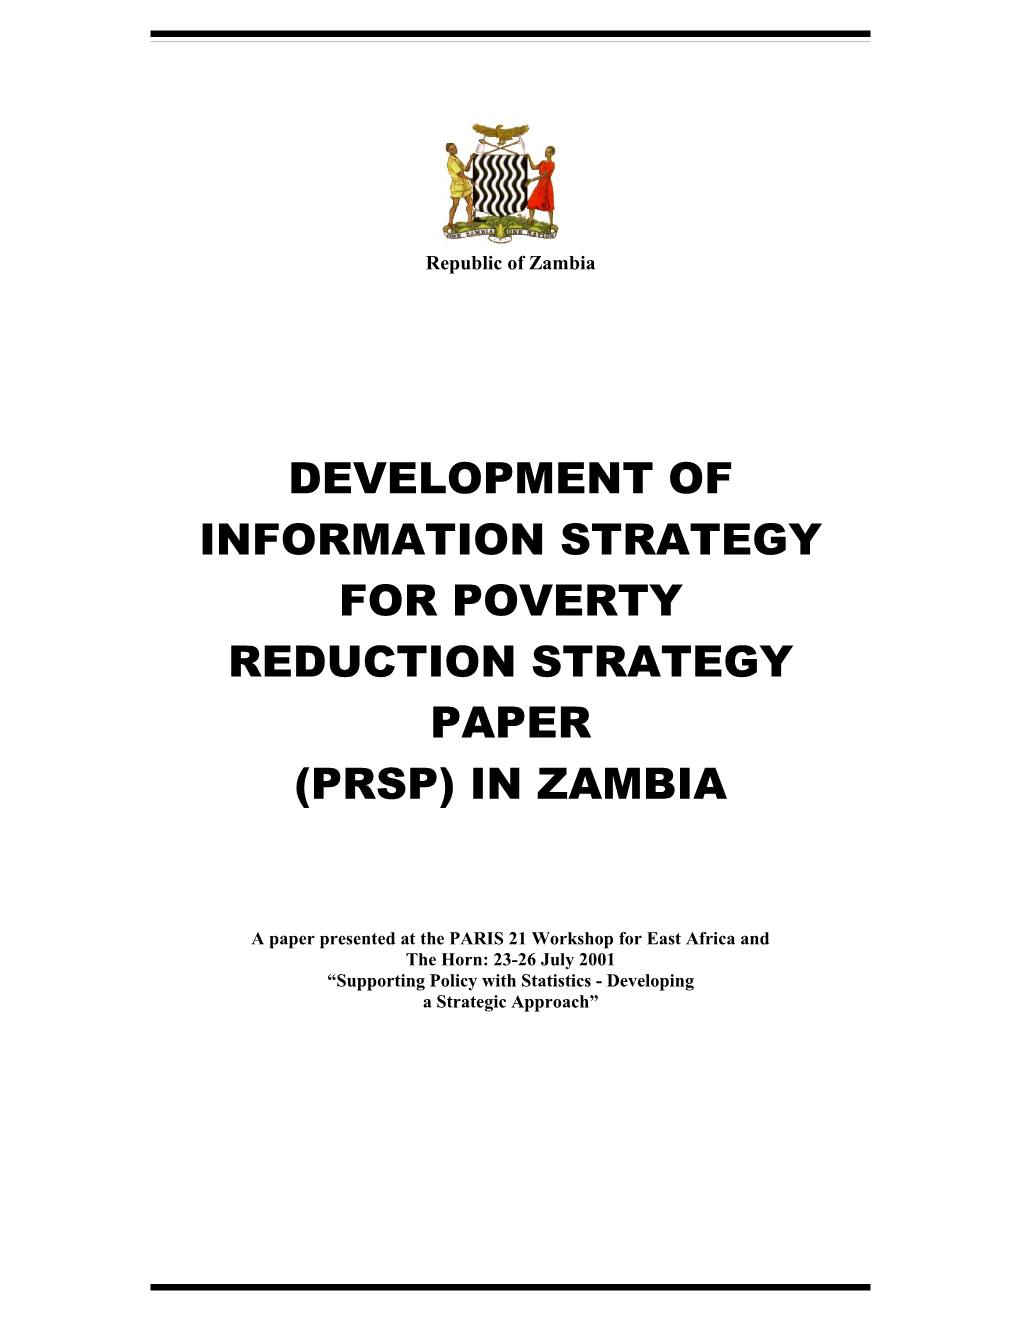 Development of Information Strategy for Poverty